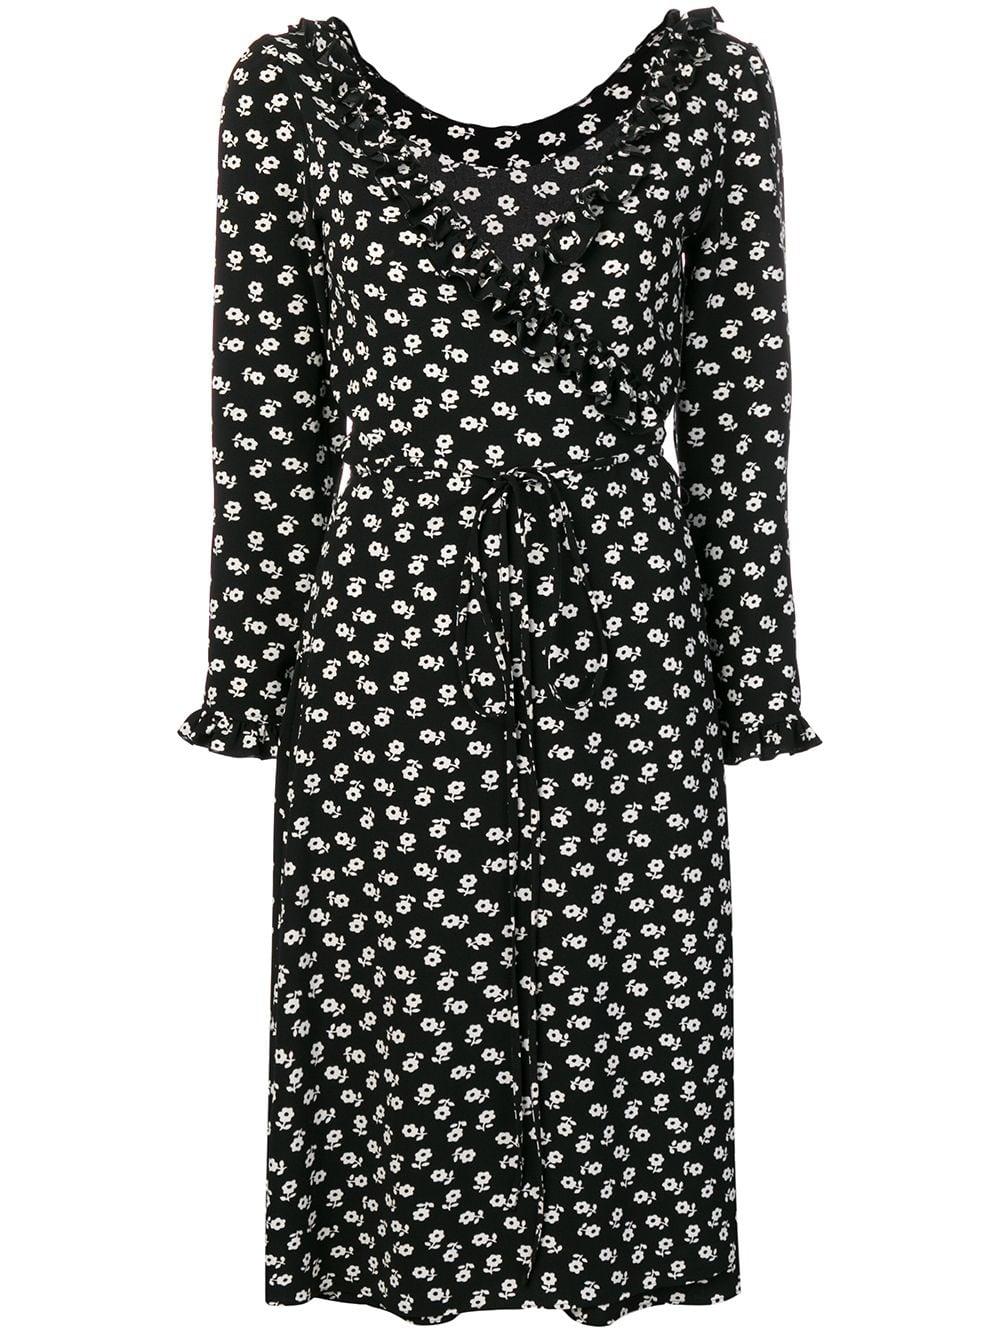 ALEXACHUNG Synthetic Floral Print Wrap Dress in Black - Lyst